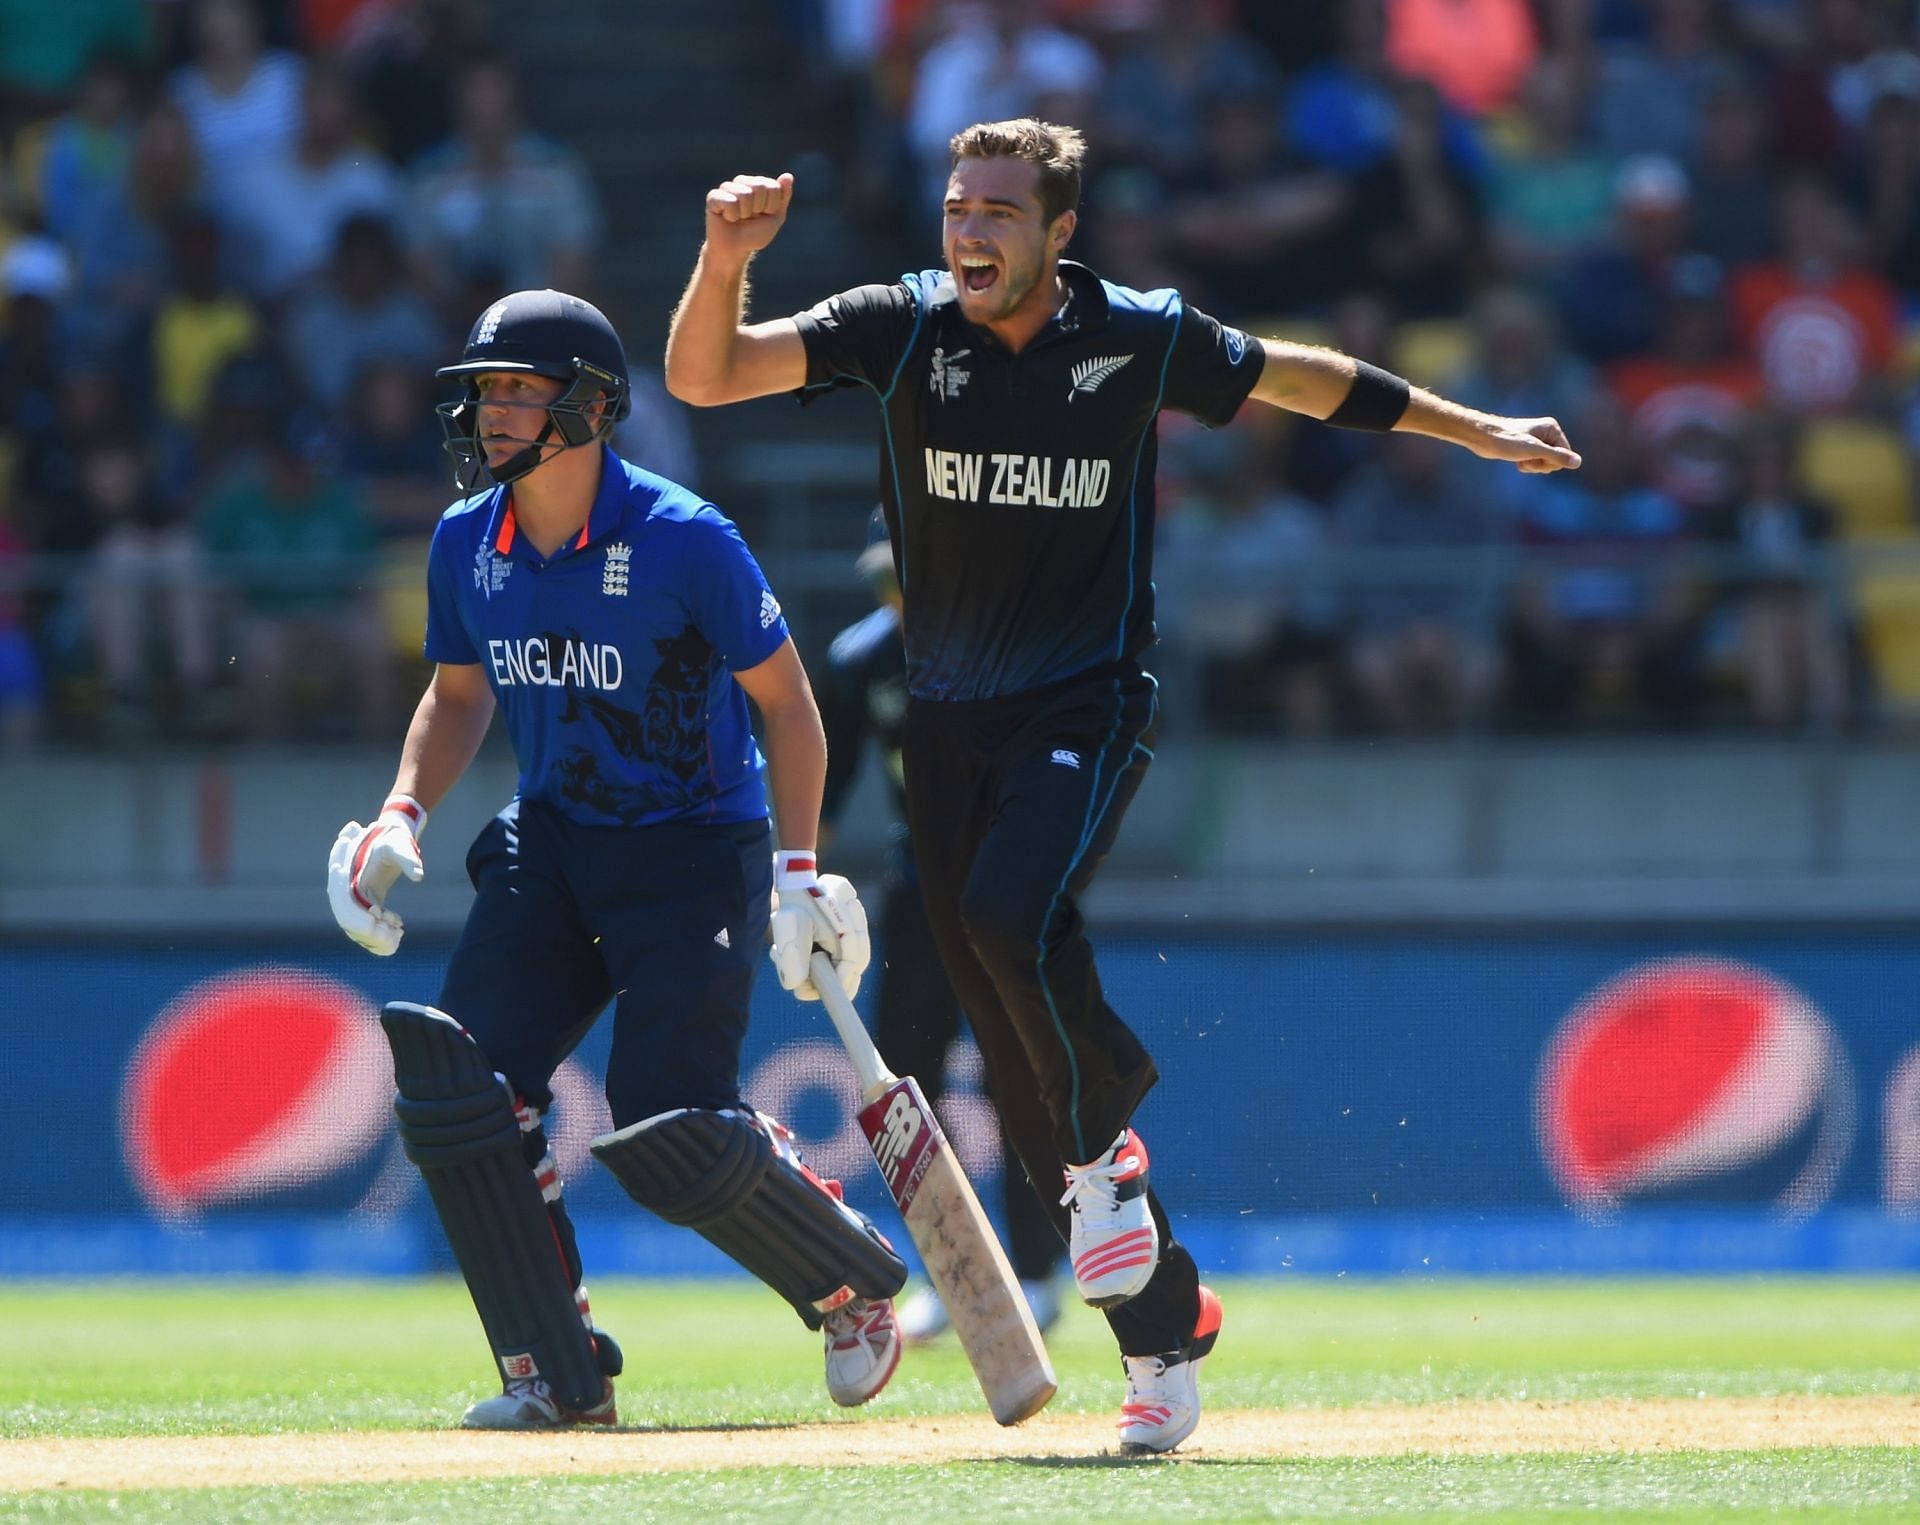 Tim Southee during England v New Zealand - 2015 ICC Cricket World Cup [Getty Images]